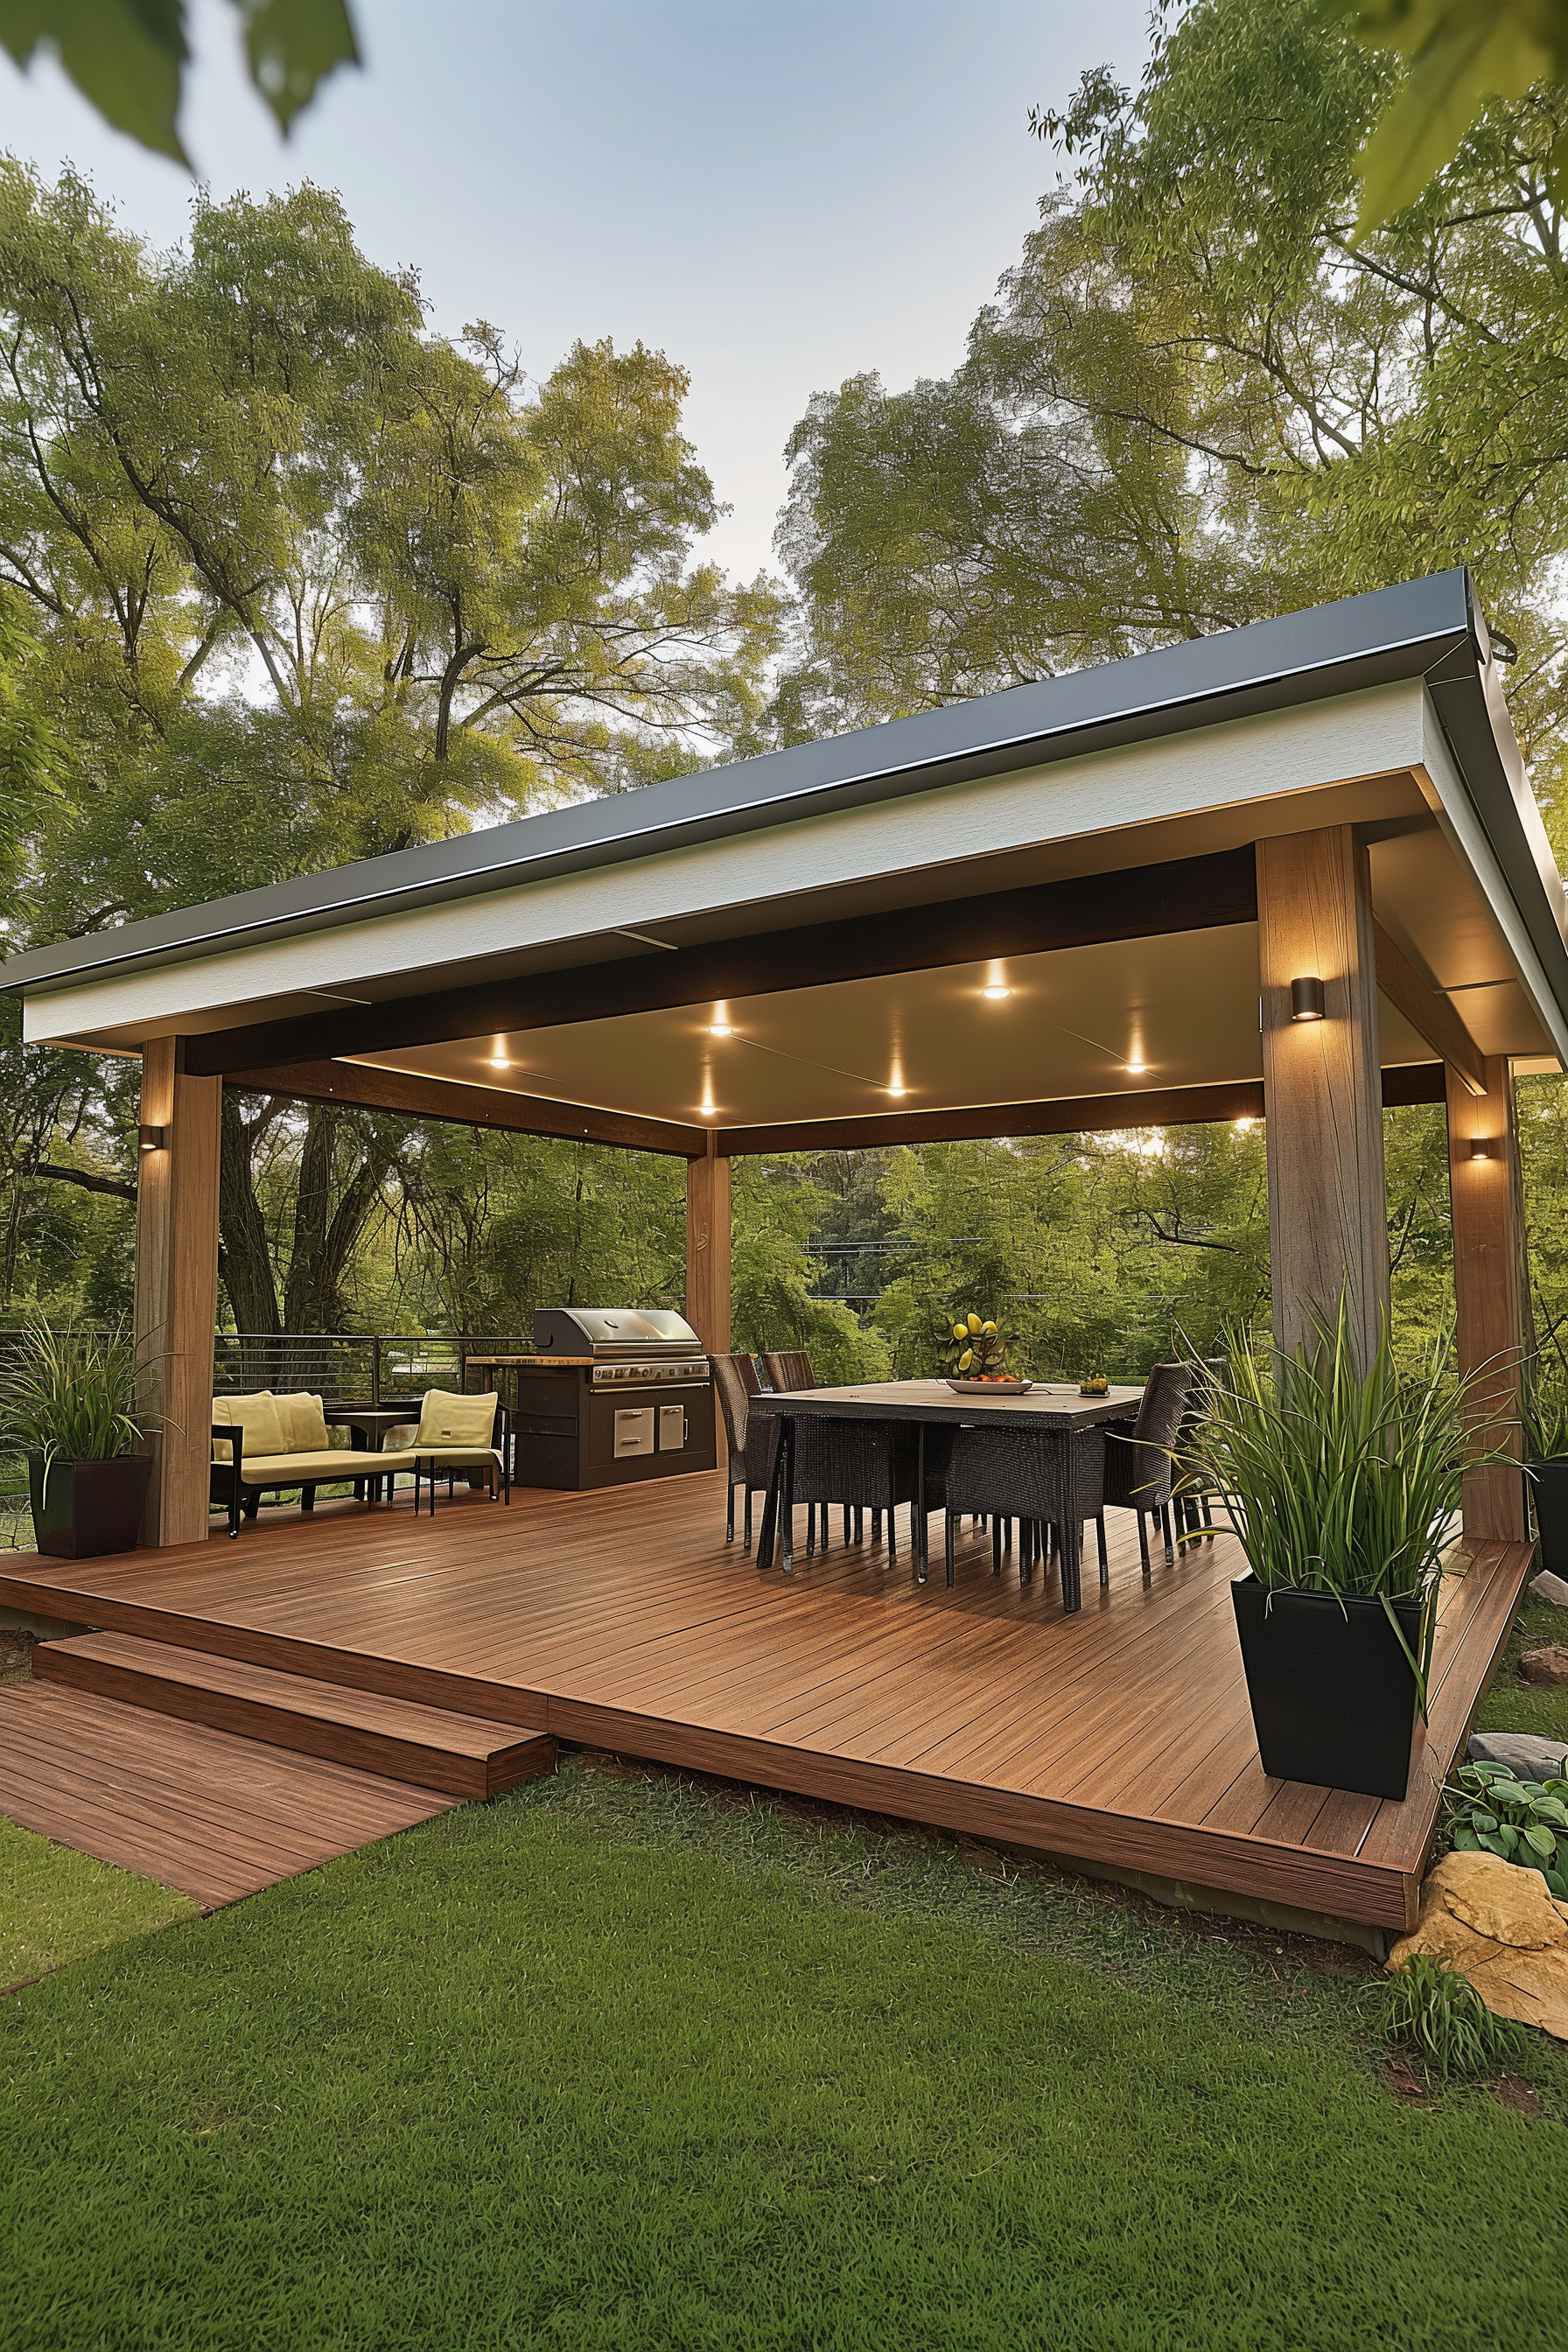 Enhance Your Outdoor Space with a Beautiful Patio Deck